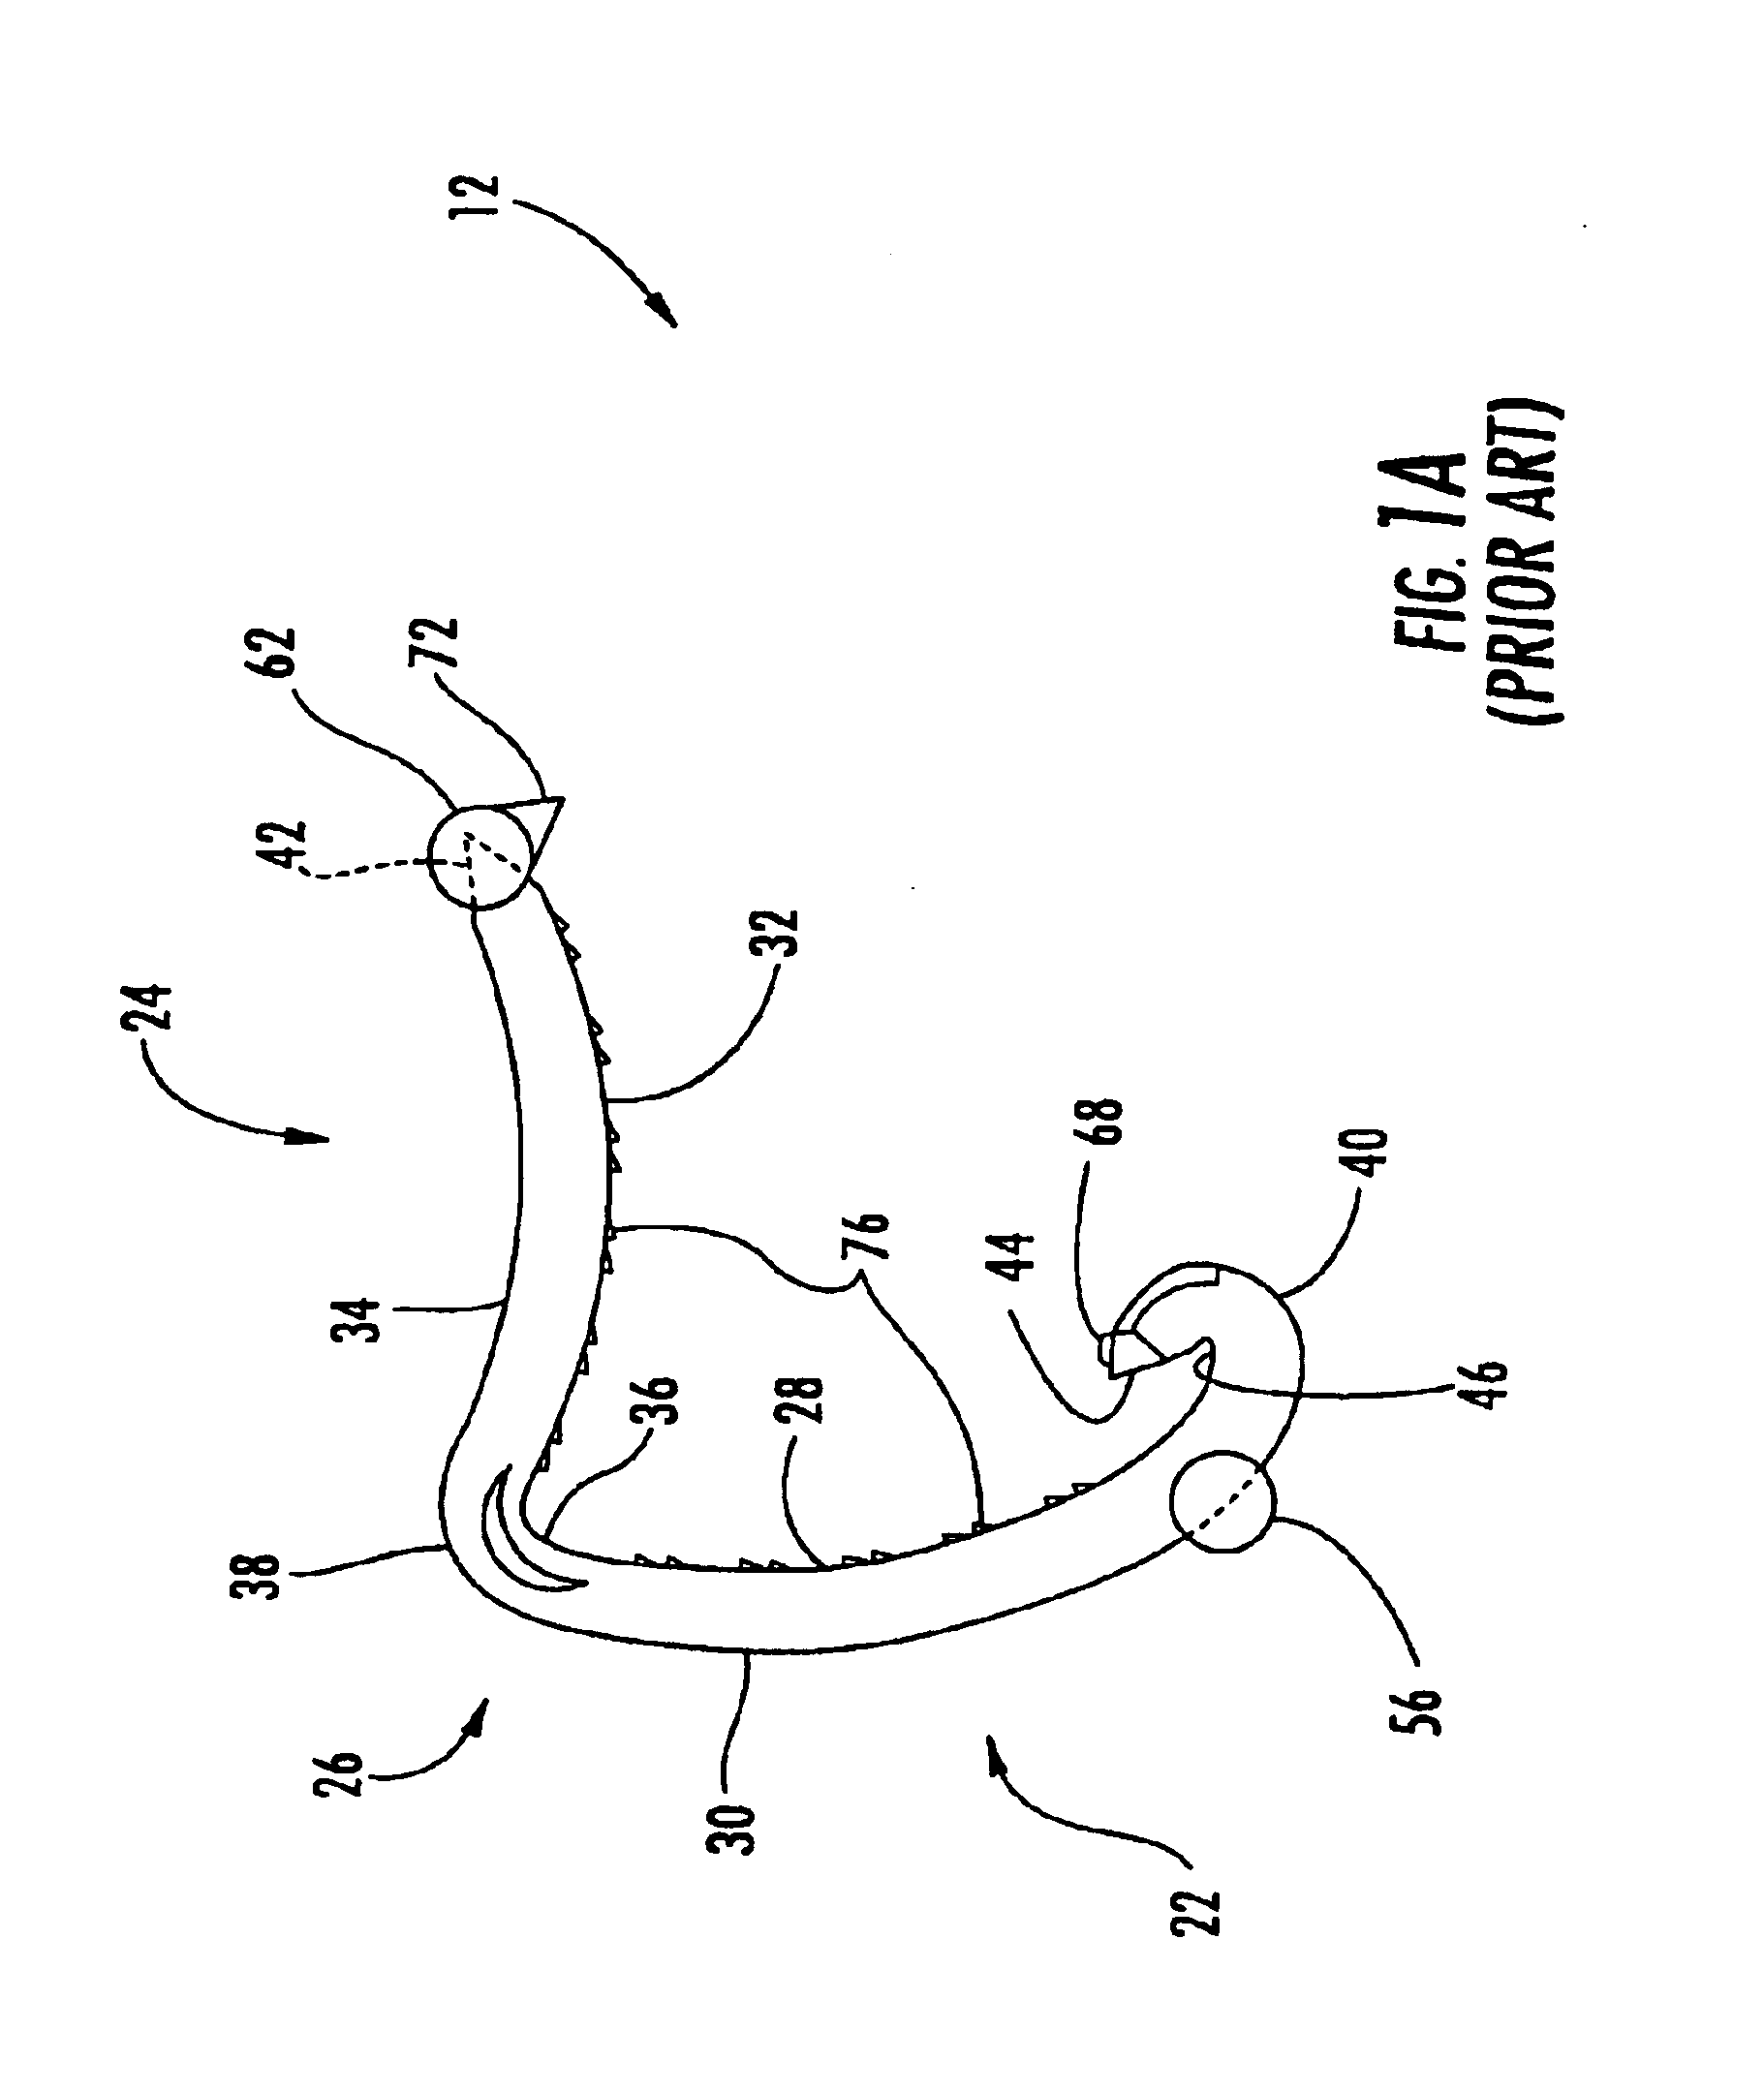 Cartridge for holding asymmetric surgical clips